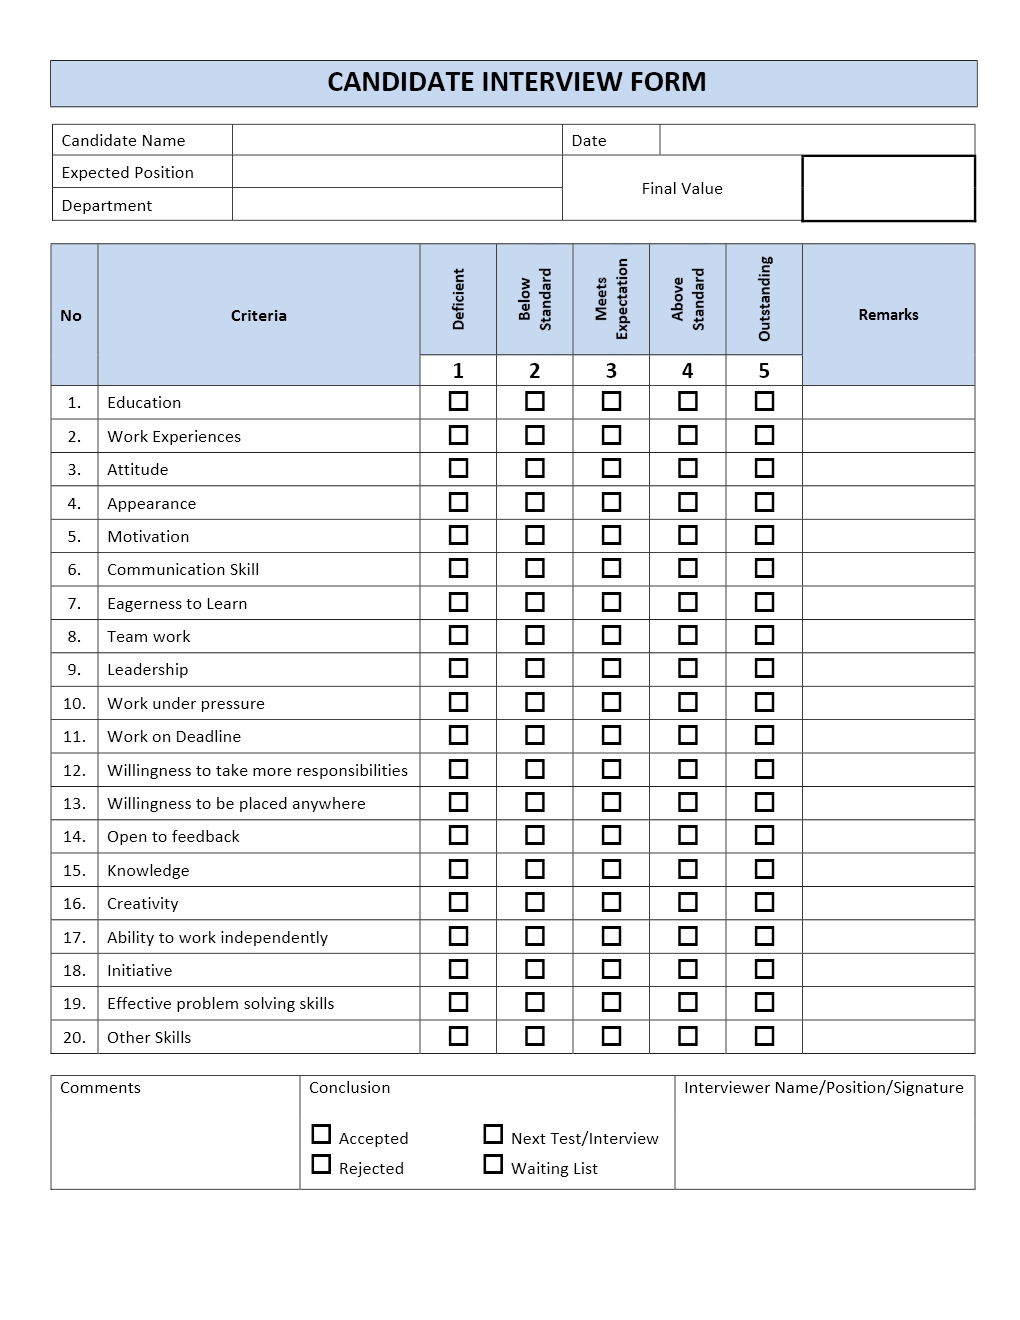 Candidate Interview Form